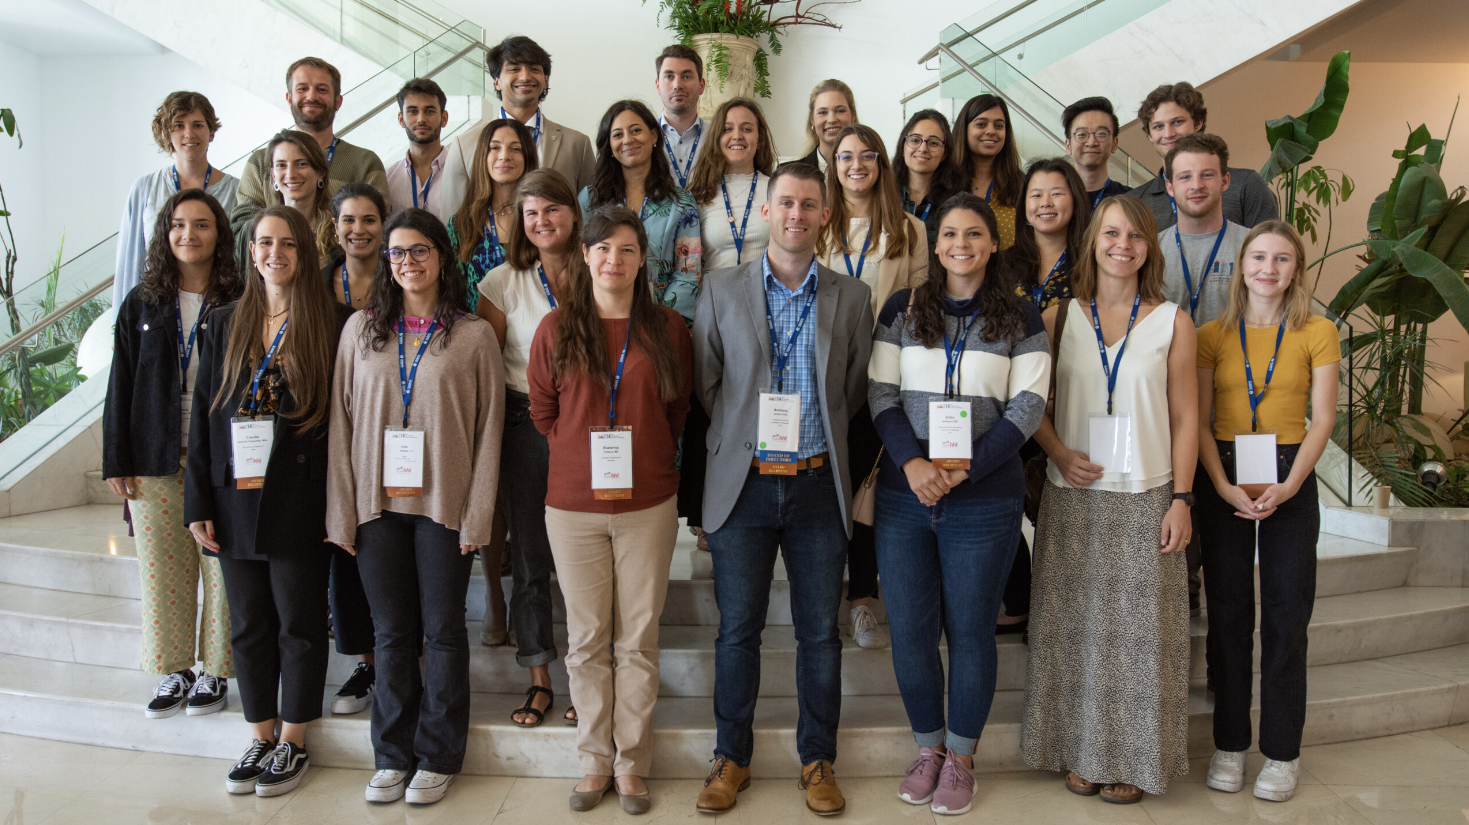 Recipients of the Young Investigator Awards at the 2022 14th International HHT Scientific Conference, Portugal.